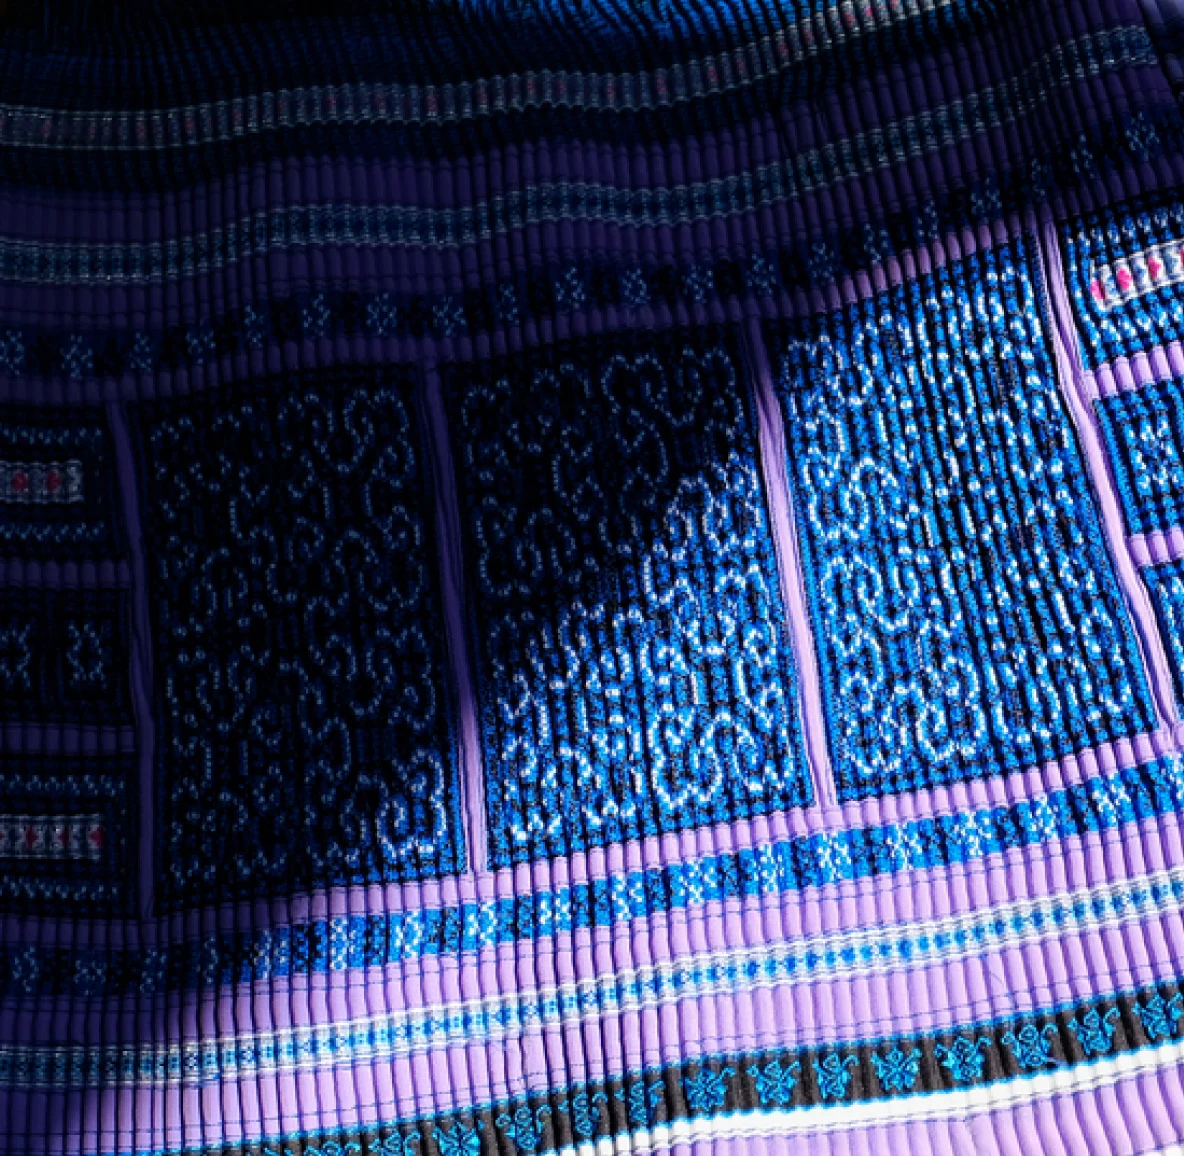 A blue and purple patterned rug